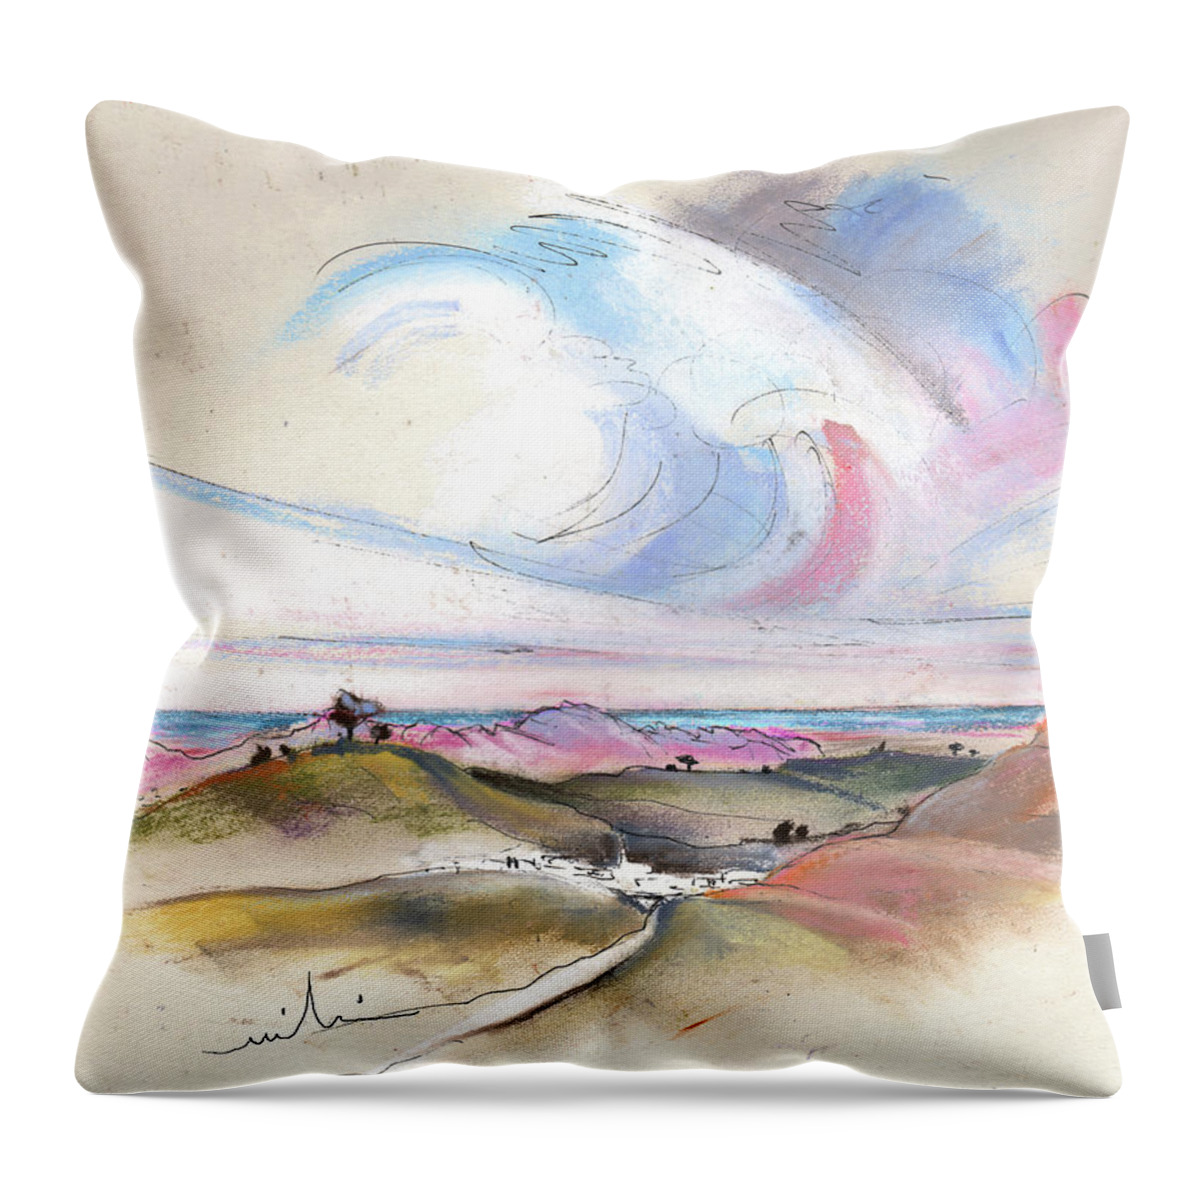 Spain Throw Pillow featuring the painting Turre in Spain 01 by Miki De Goodaboom